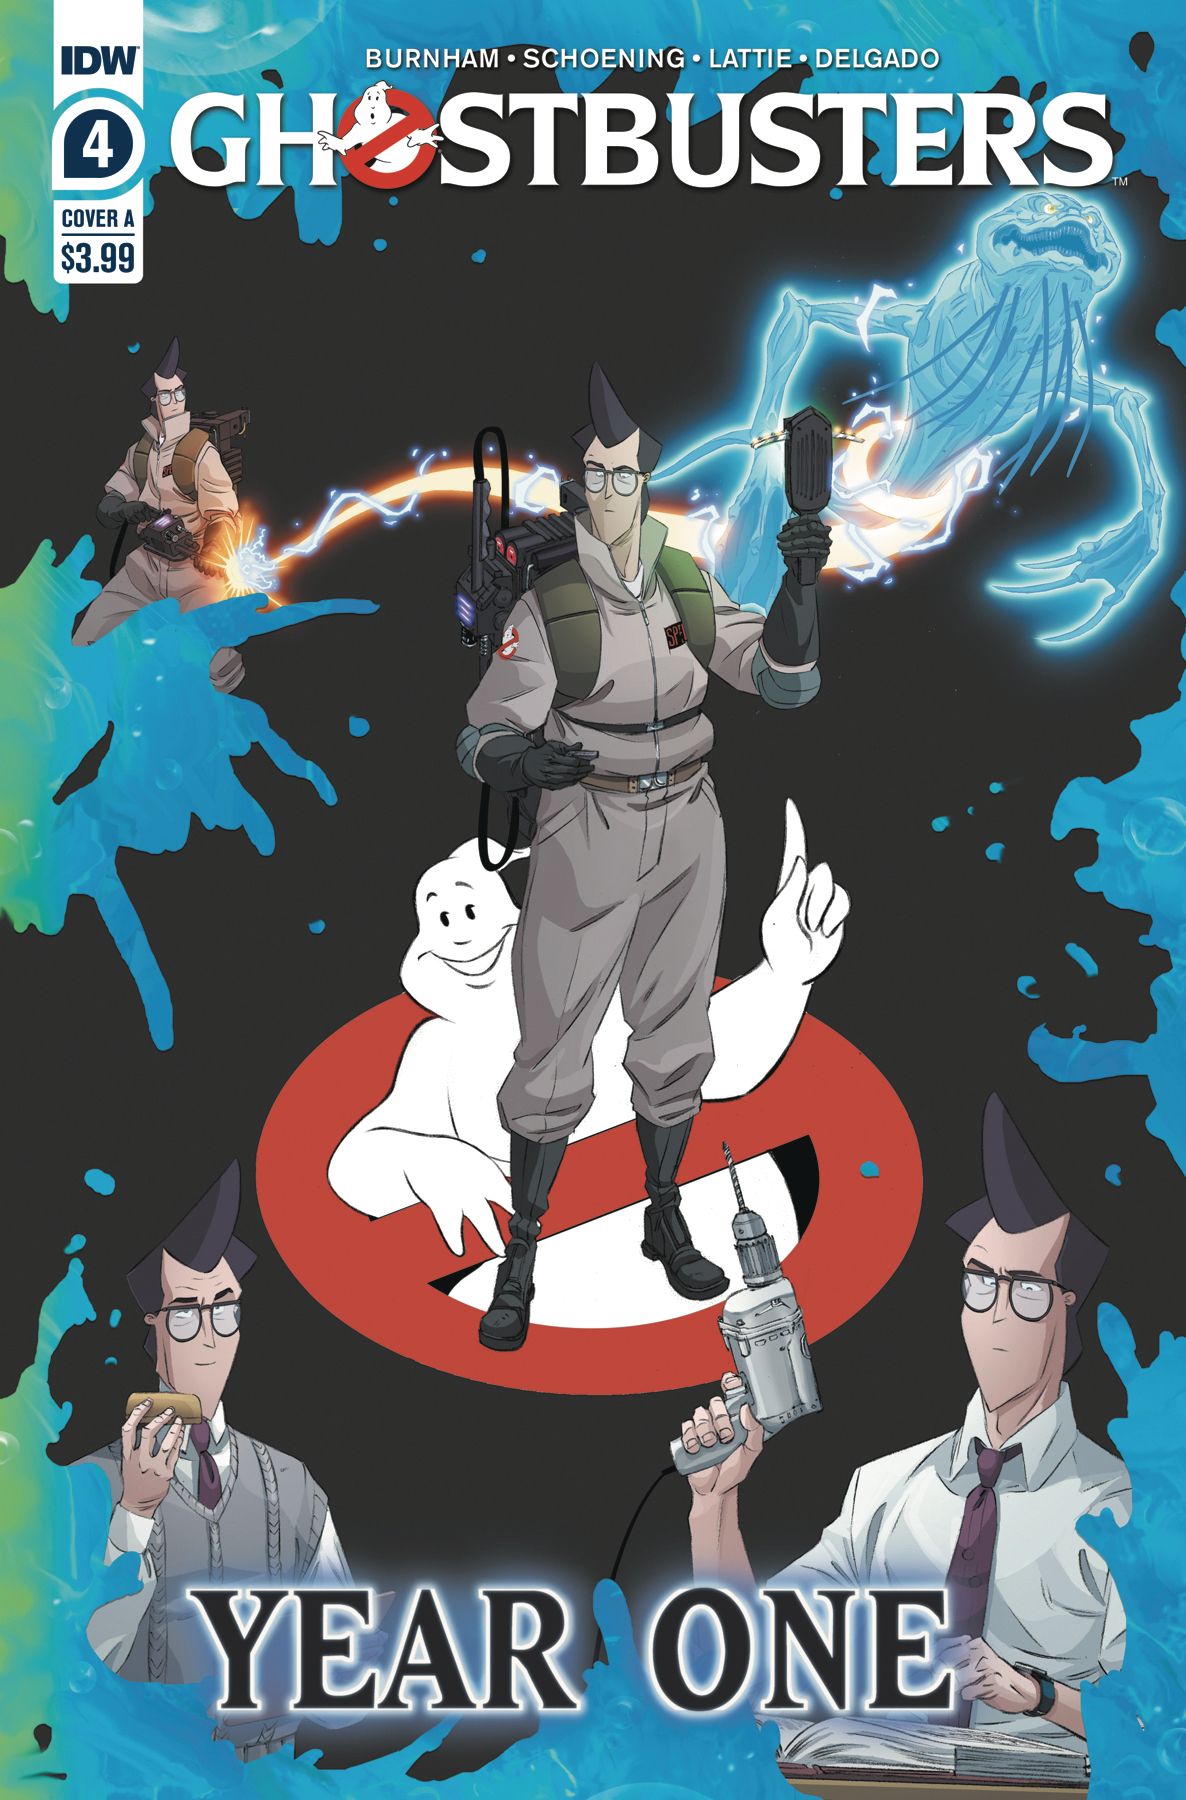 Ghostbusters: Year One #4 Comic